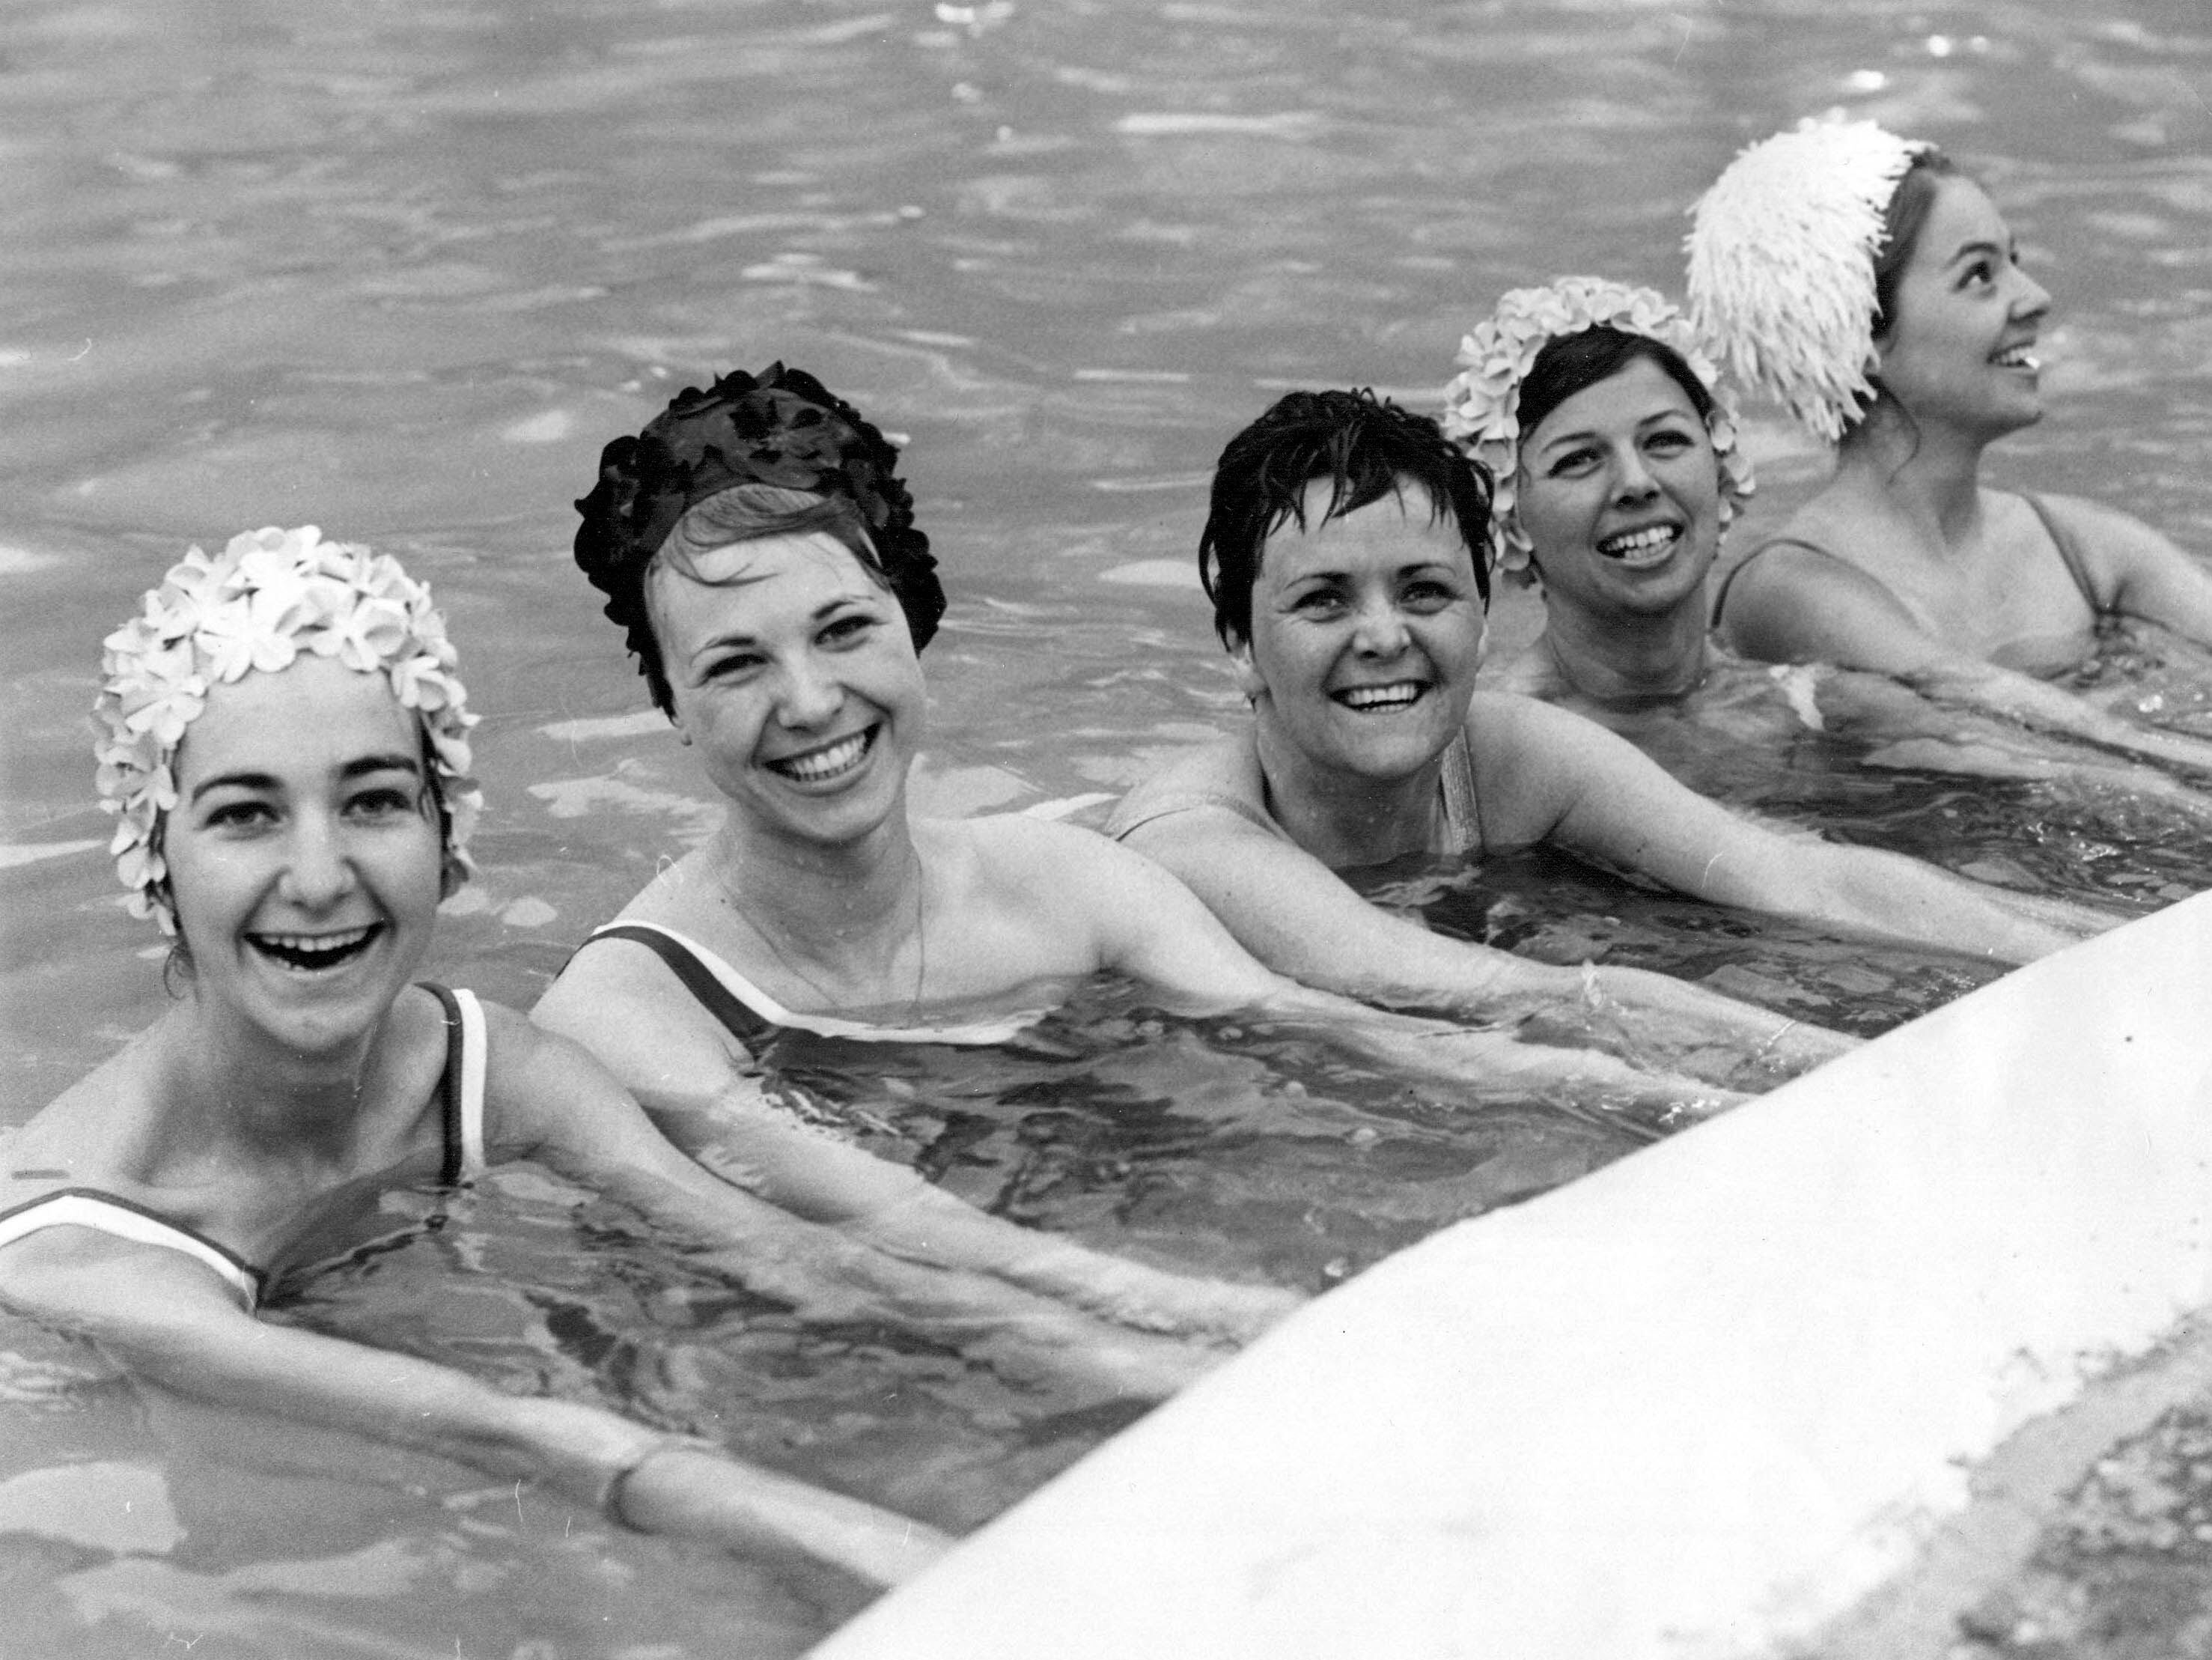 22 fascinating summer pictures from days gone by in the West Midlands